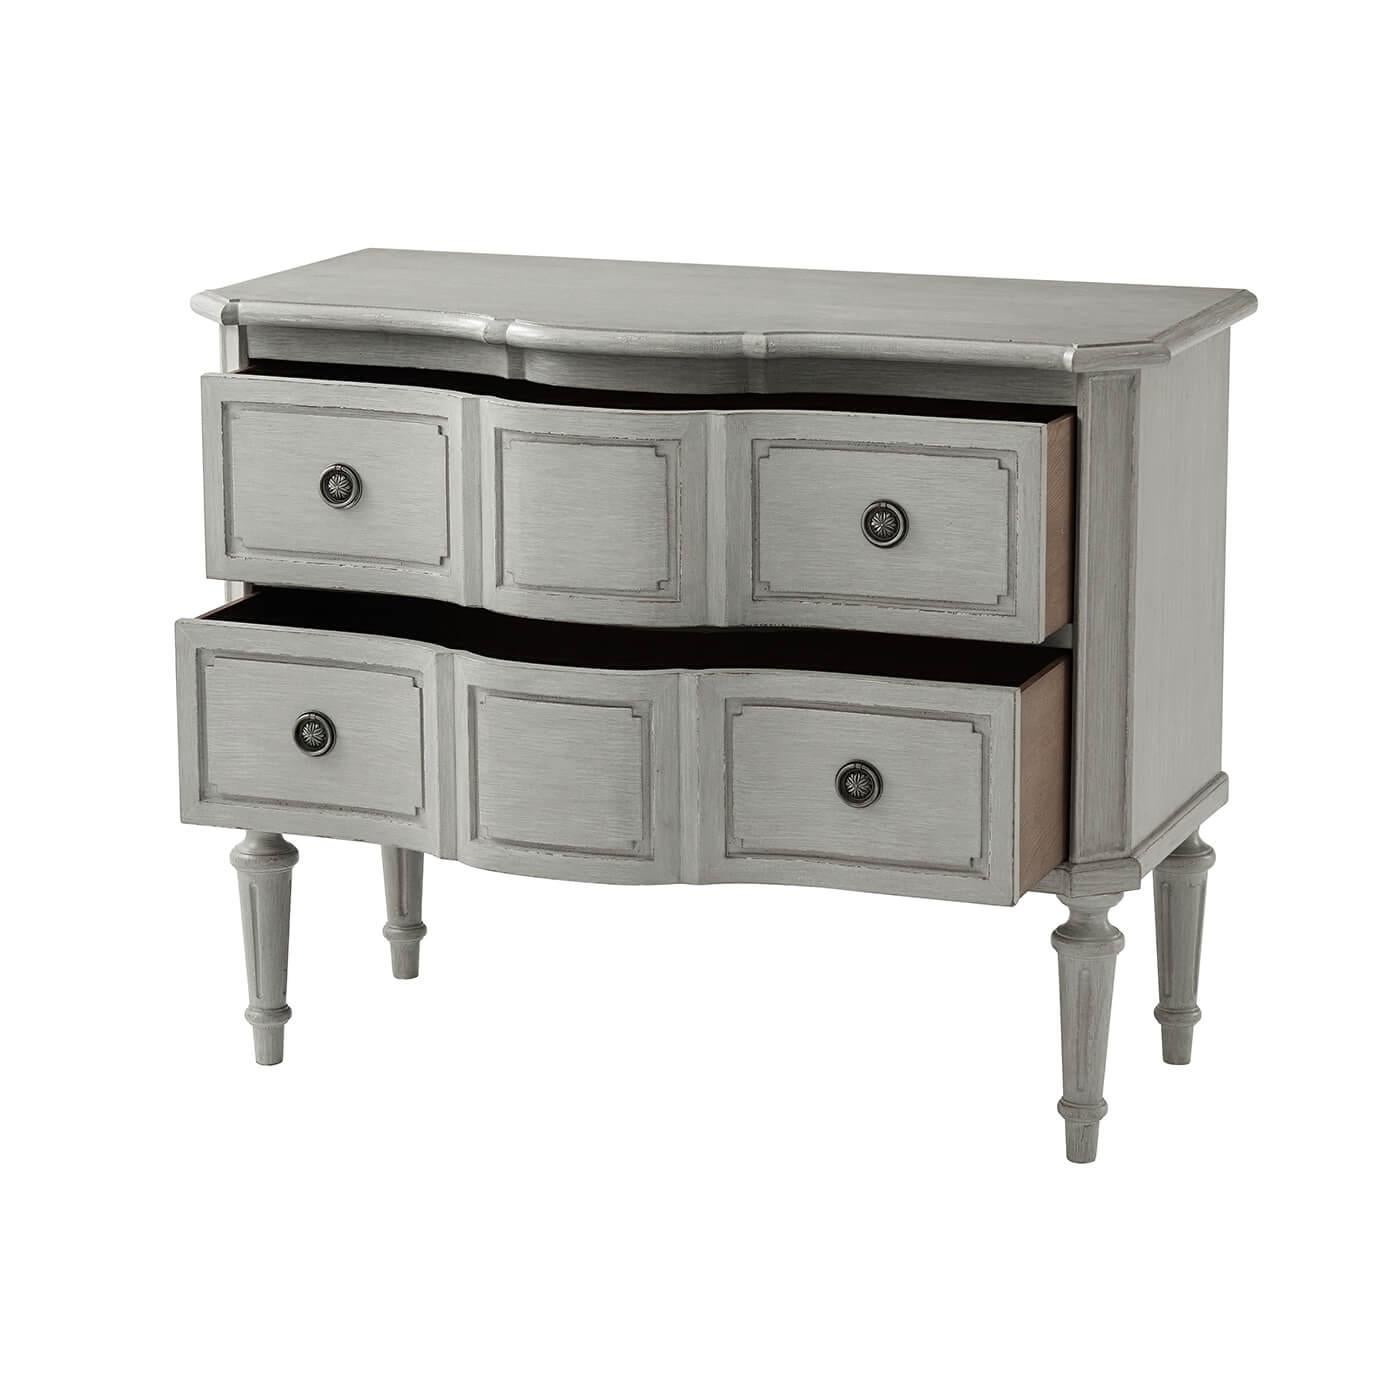 Italian Provincial dresser - Louis XVI style provincial commode with an antiqued hand painted and slightly distressed finish, a serpentine molded edge top above two long paneled drawers, with antiqued pewter finish roundel handles, with canted